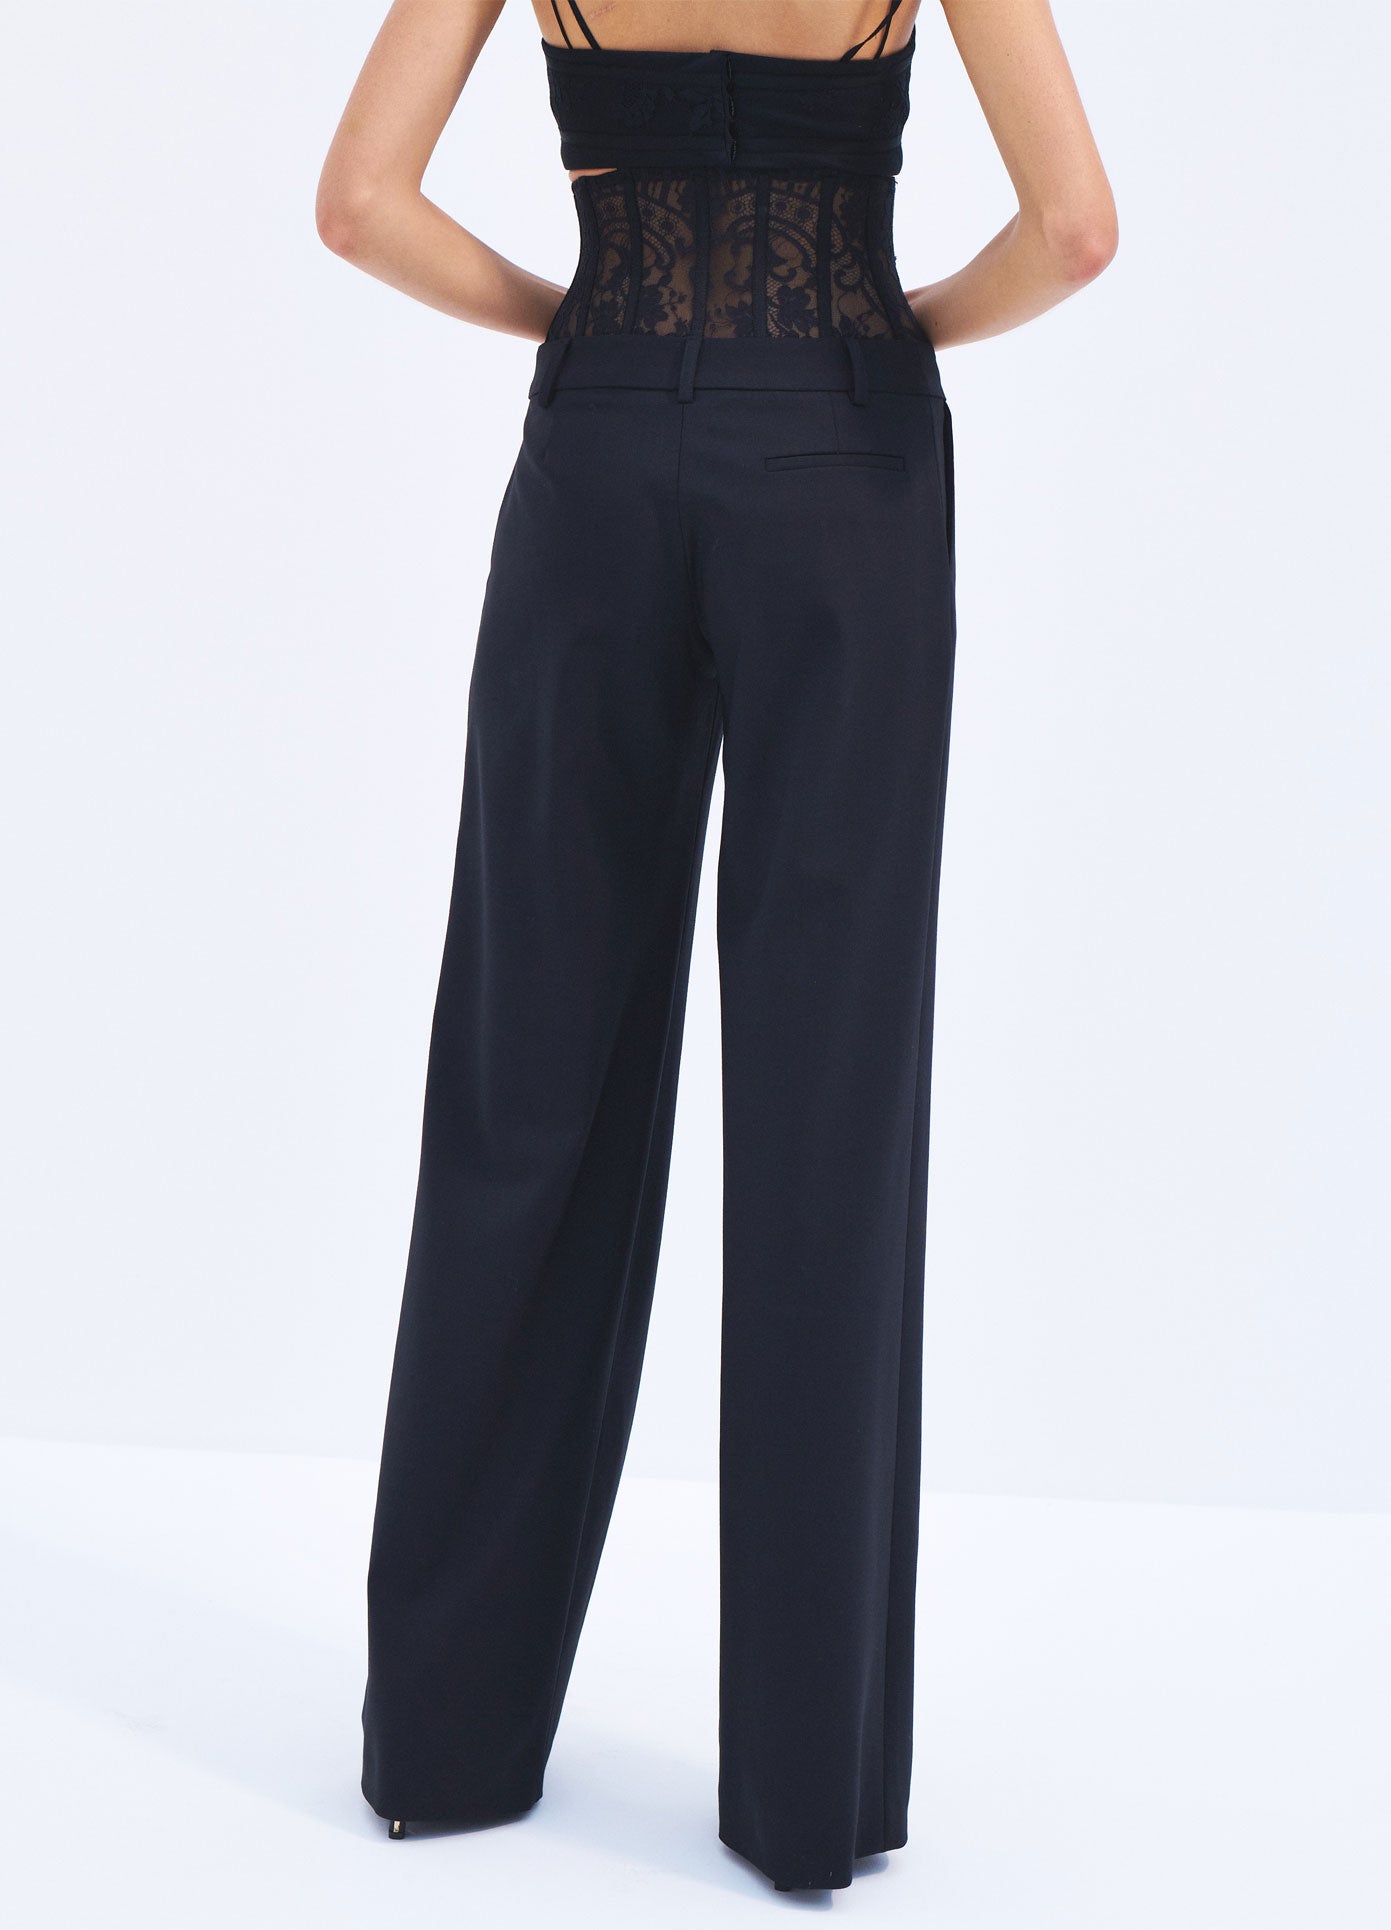 MONSE Spring 2024 Lace Bustier Trousers in Black on model back bottoms view